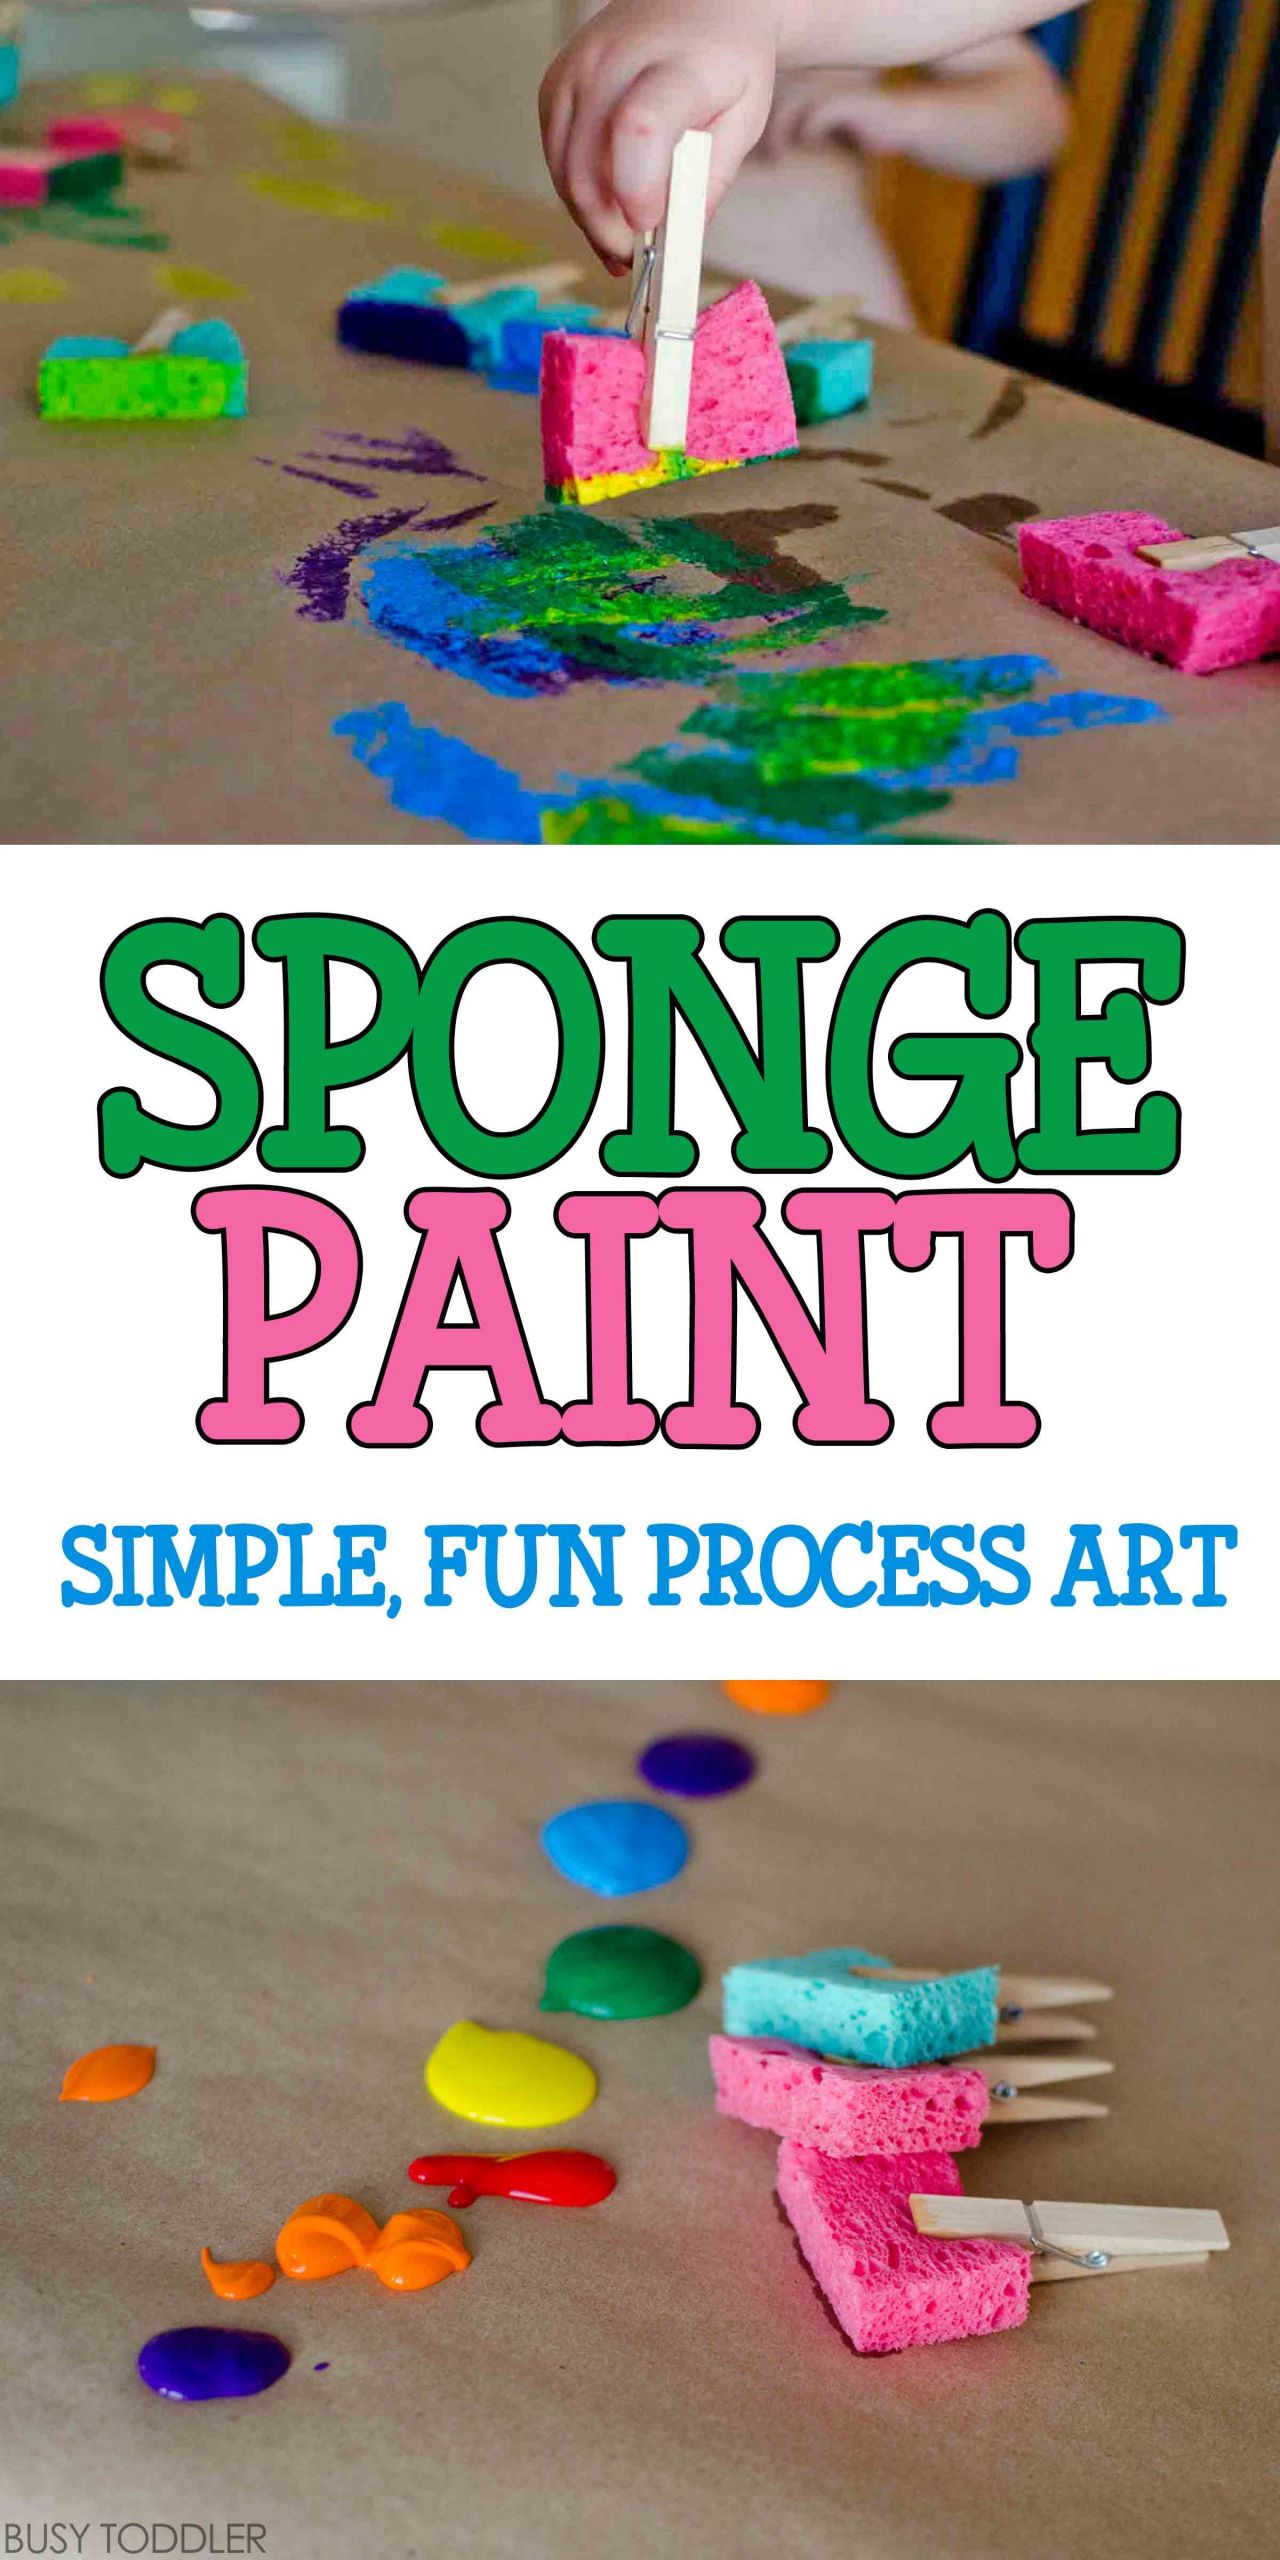 Easy Projects For Preschoolers
 Sponge Painting Process Art BUSY TODDLER